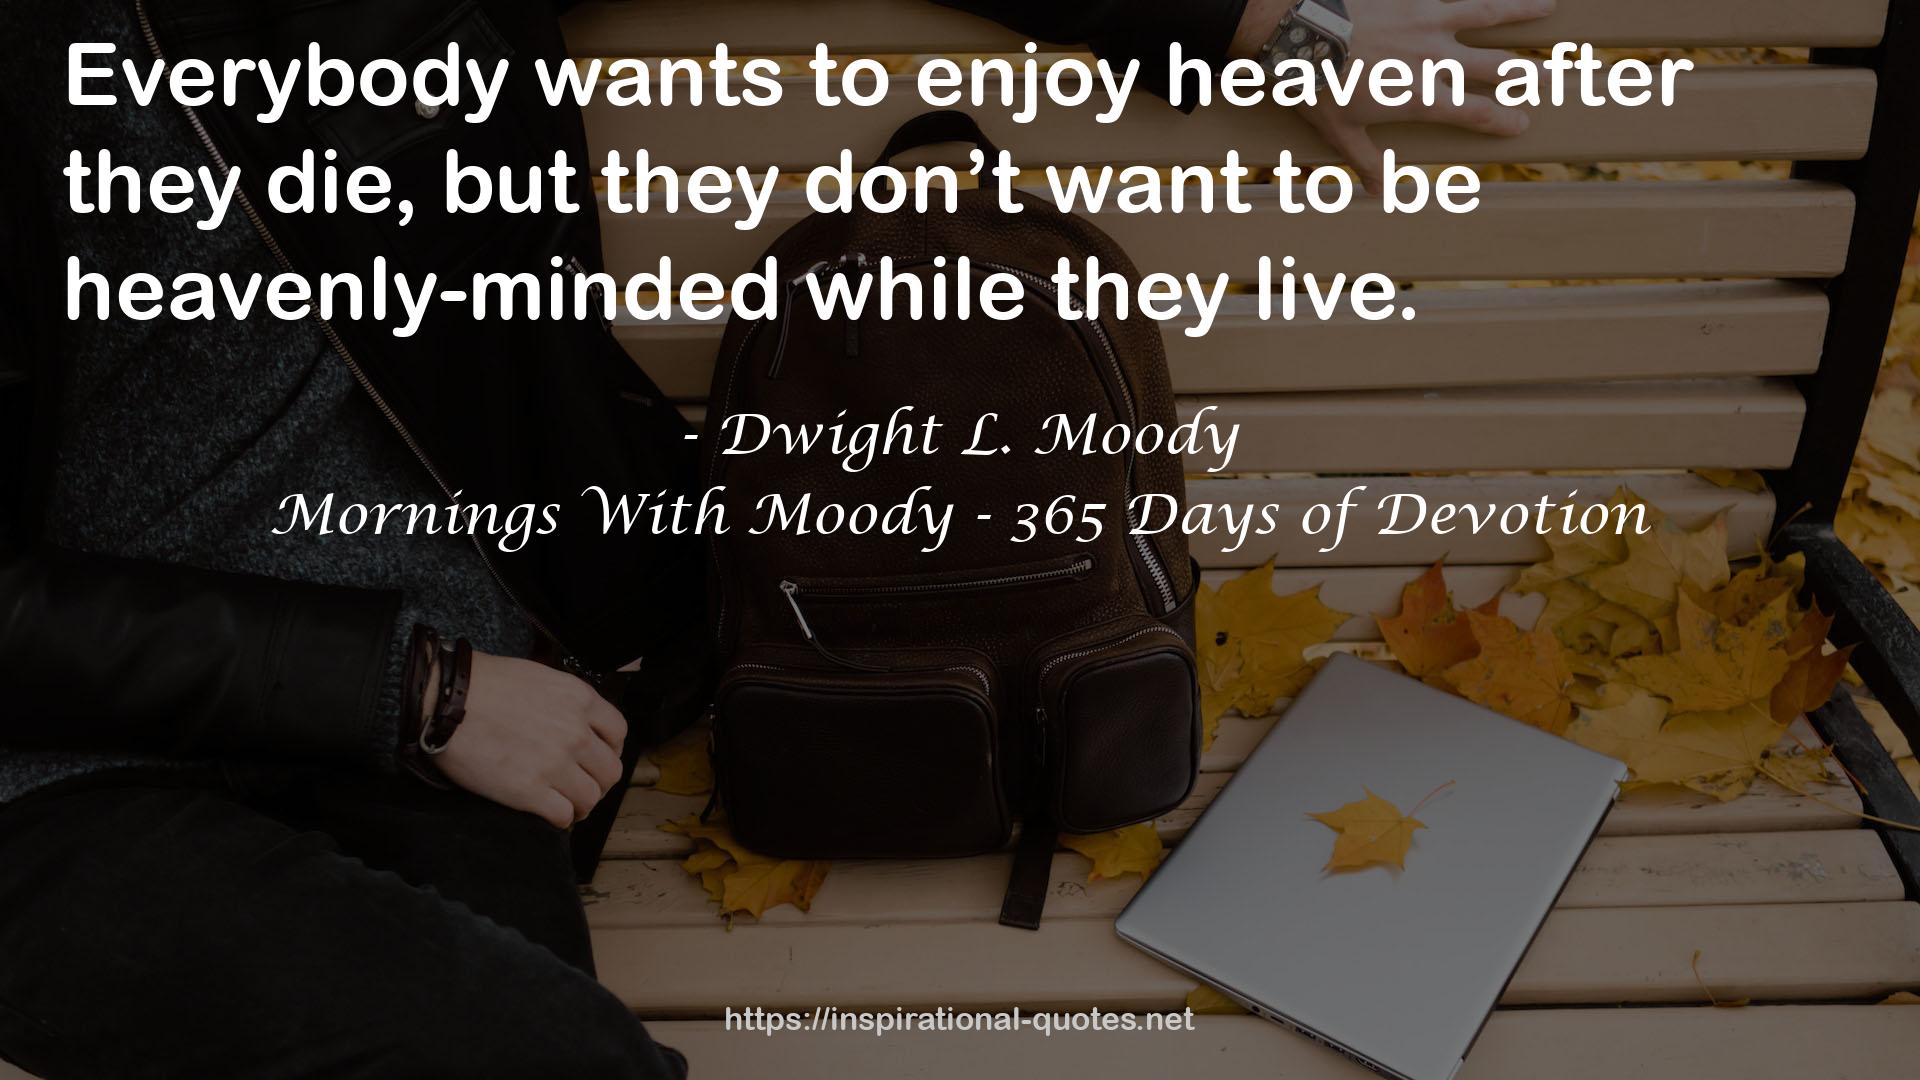 Mornings With Moody - 365 Days of Devotion QUOTES